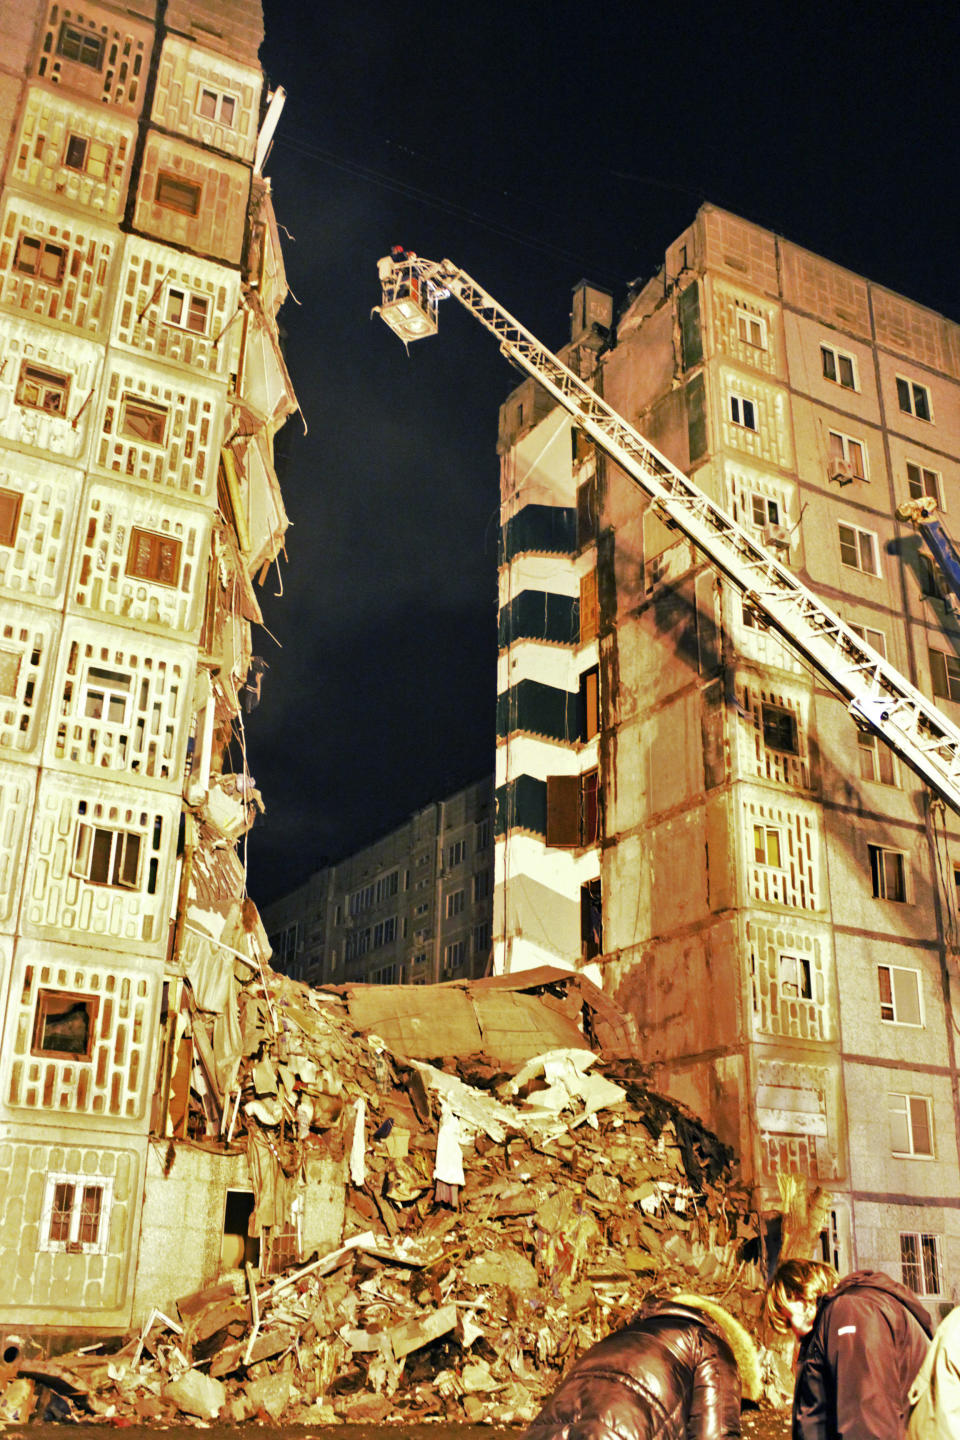 In this photo distributed by the Astrakhan branch of the Ministry for Emergency Situations, Emergency Situations Ministry rescuers inspect debris of an apartment building early Tuesday morning, Feb. 28, 2012, after it exploded on Monday, Feb. 27, 2012, in Astrakhan, Russia. The nine-story apartment building collapsed in an explosion caused by natural gas, killing several people and while injuring 12 others. (AP Photo/ Astrakhan Branch, Ministry of Emergency Situations Press Service)